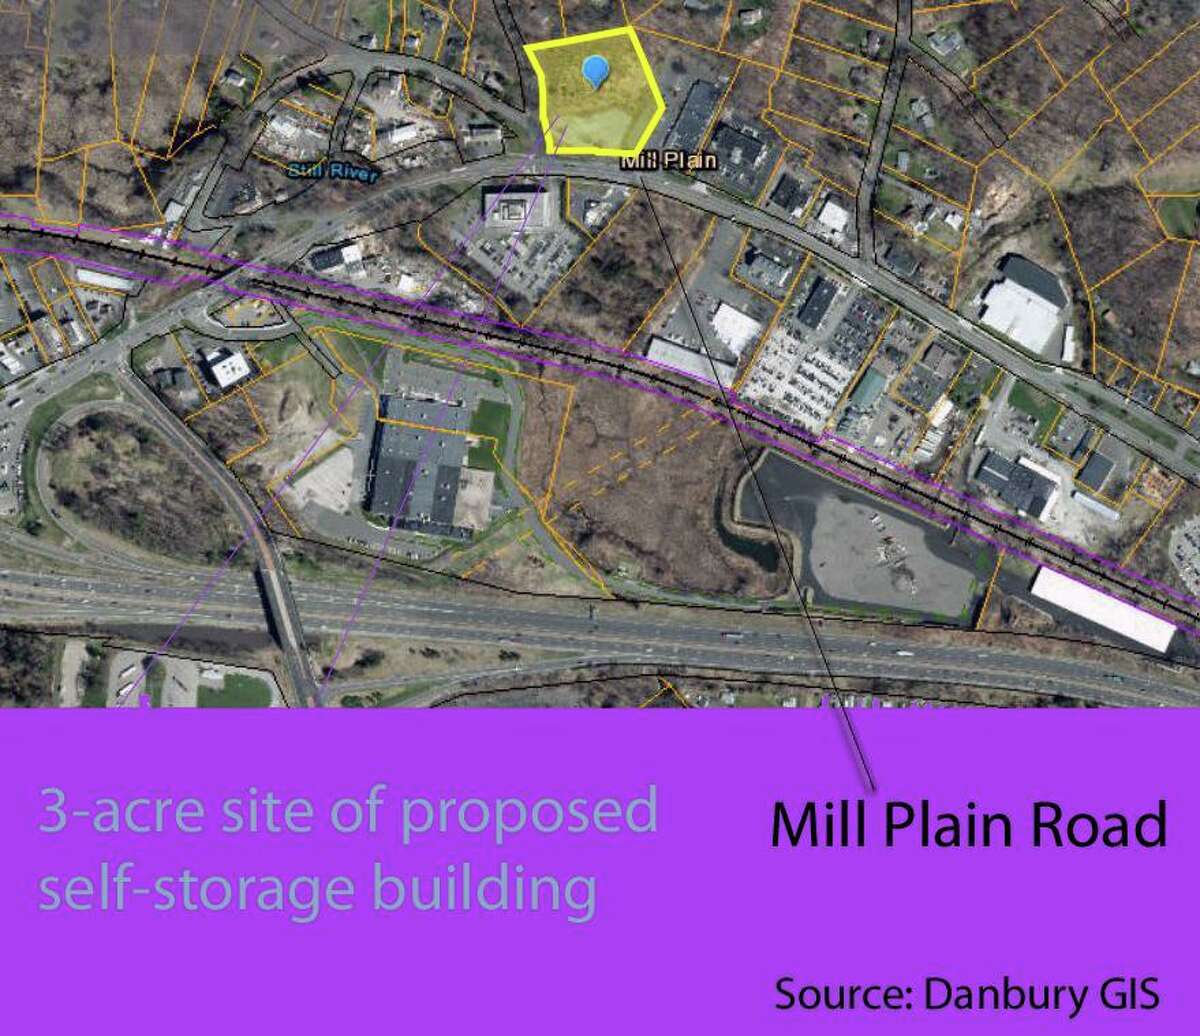 The 3-acre site of a proposed self-storage building at 95 Mill Plain Road in Danbury.